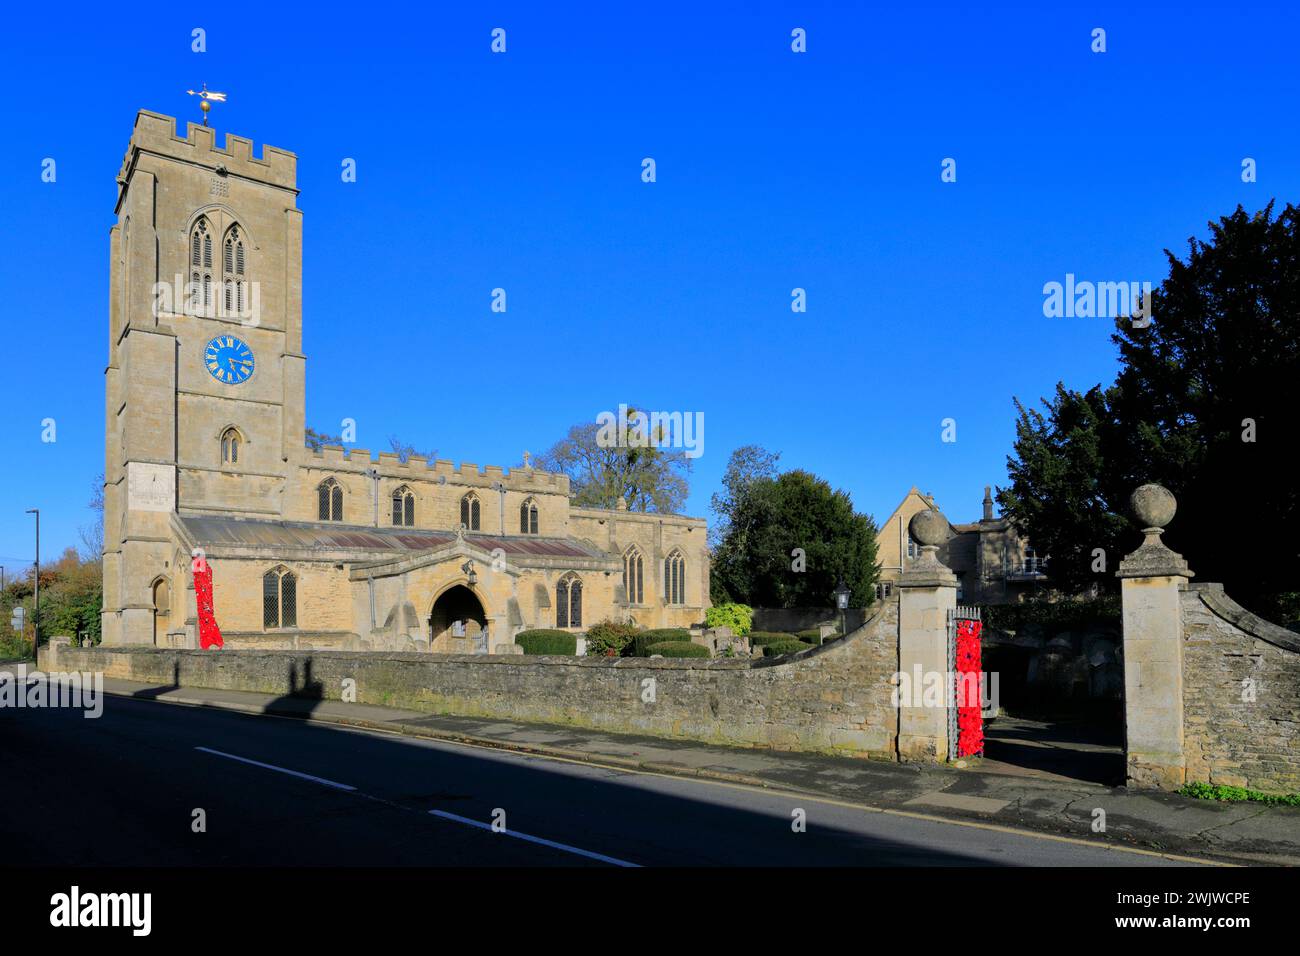 St Guthlacs church, Market Deeping town, Lincolnshire County, England, UK Stock Photo